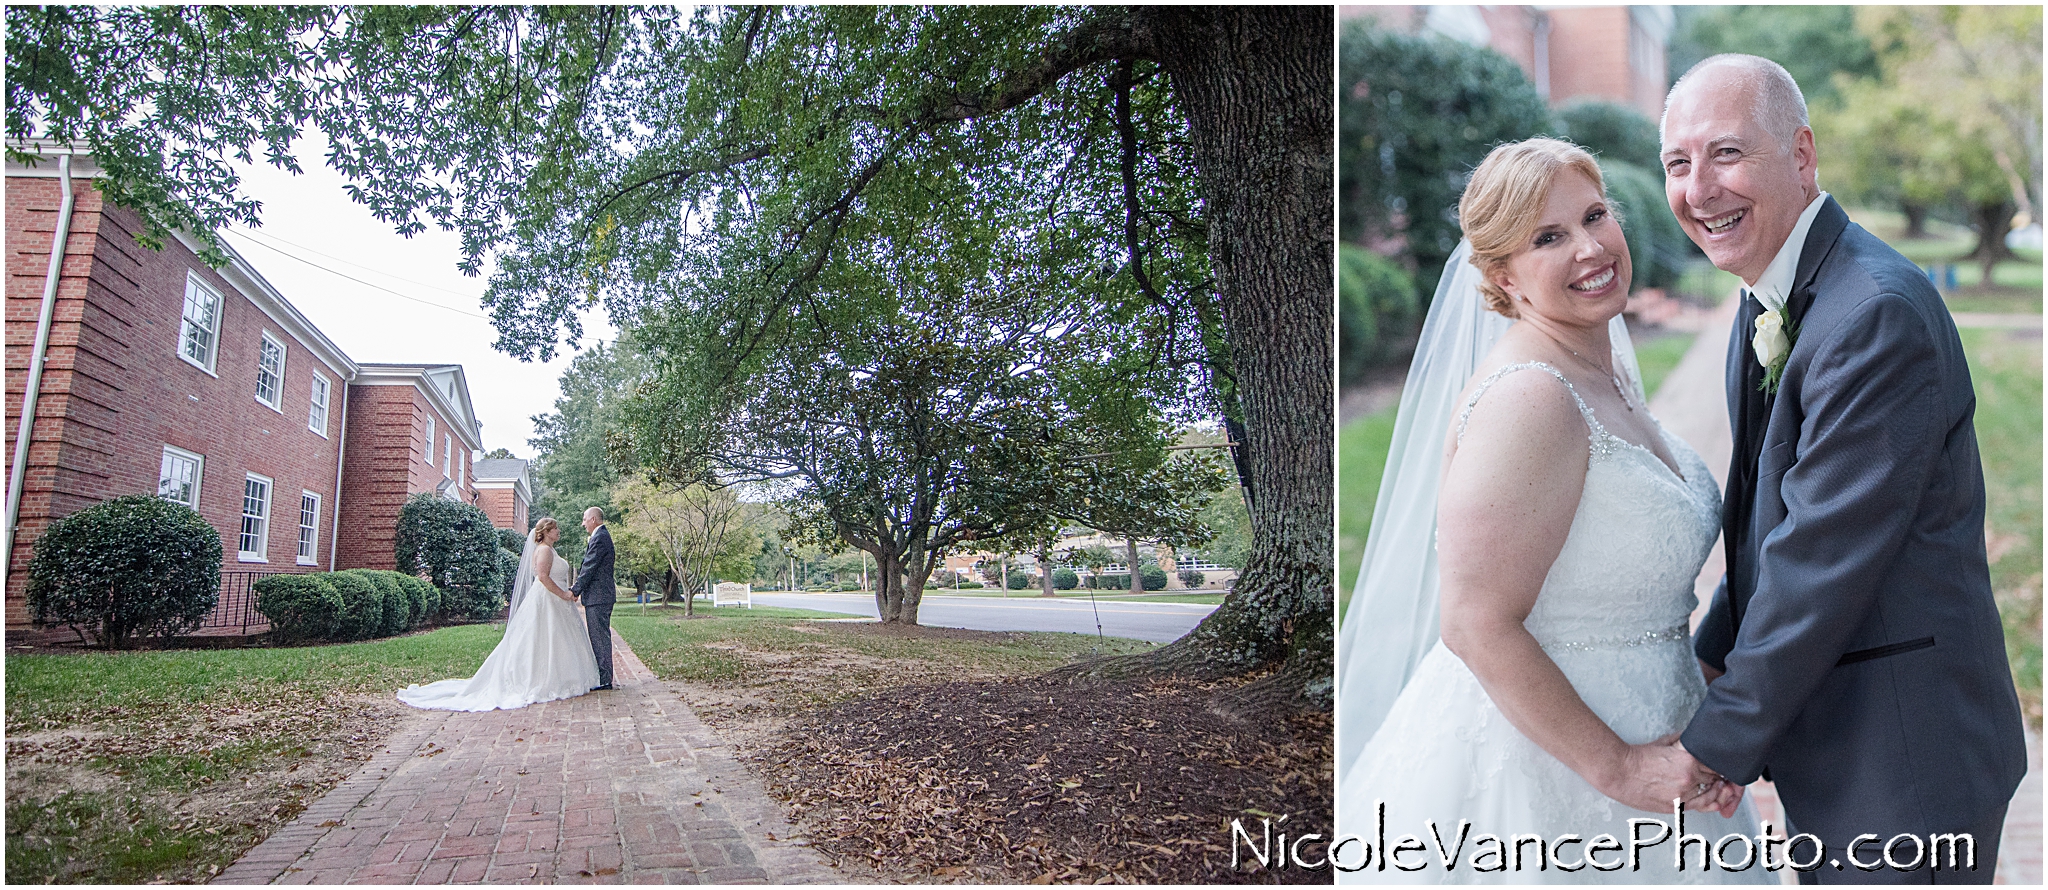 Bride and groom portraits at Third Church on Forest Ave.